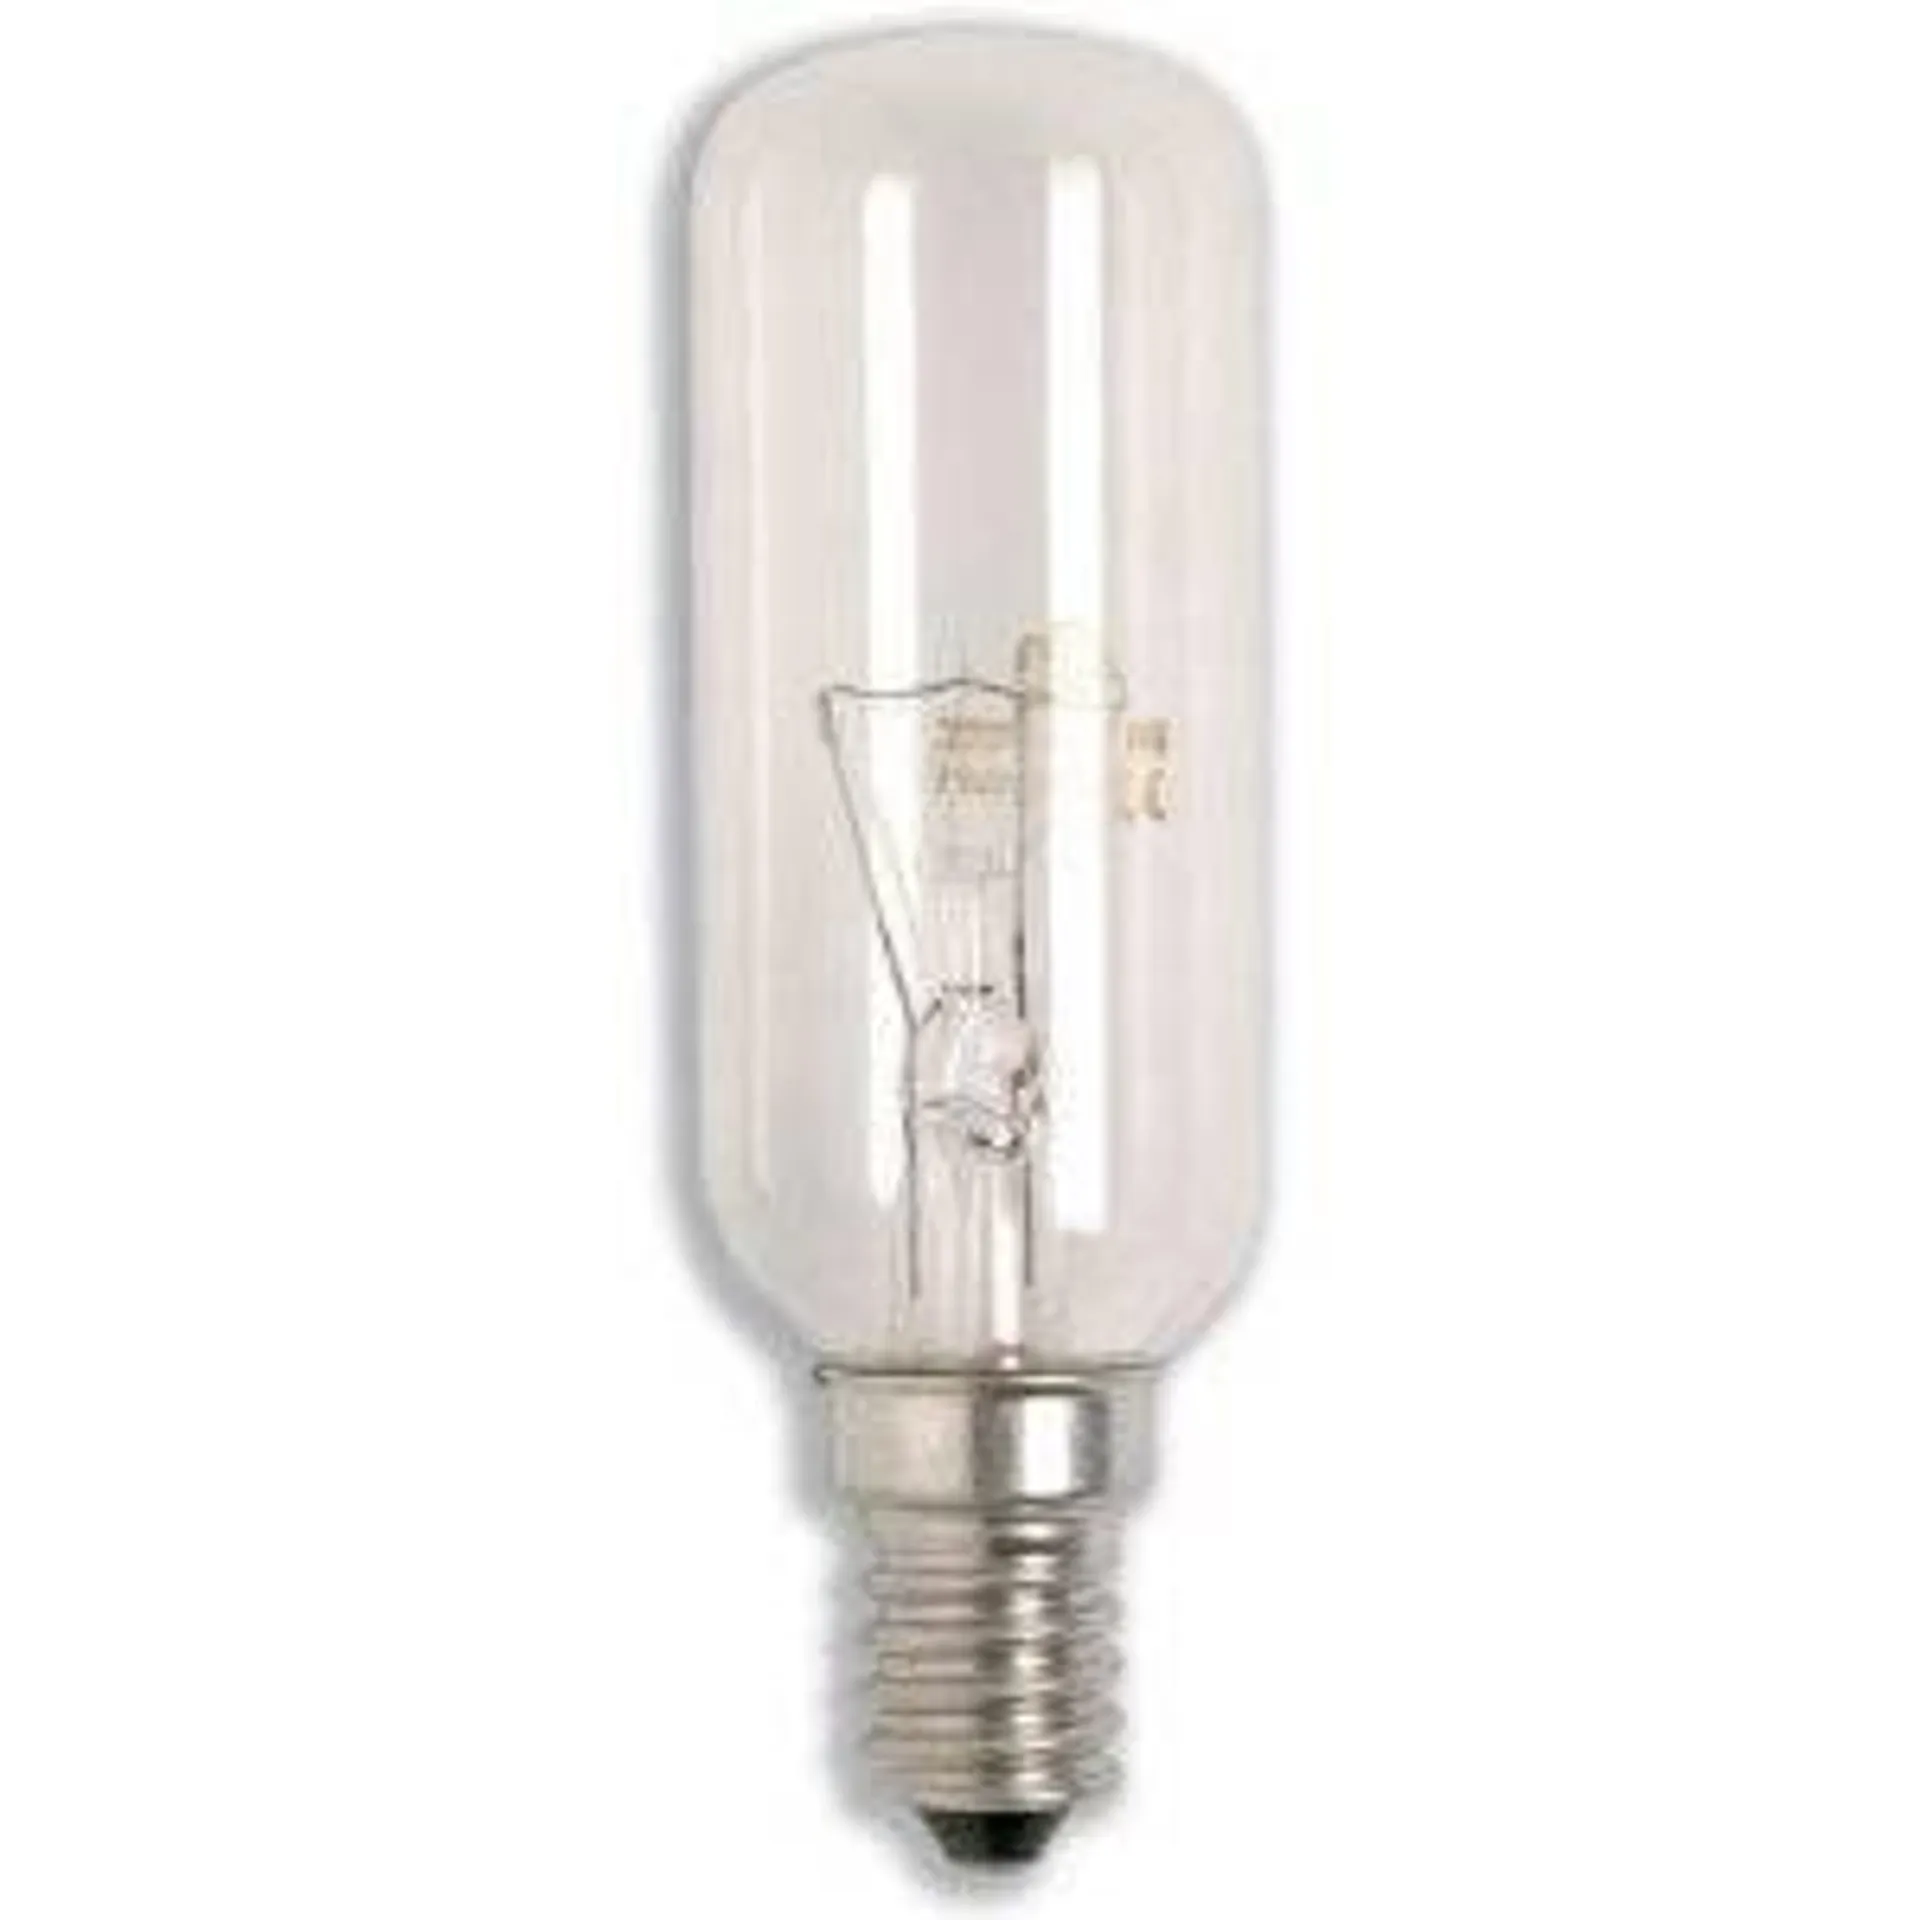 15w SES Oven Lamps T/Blister